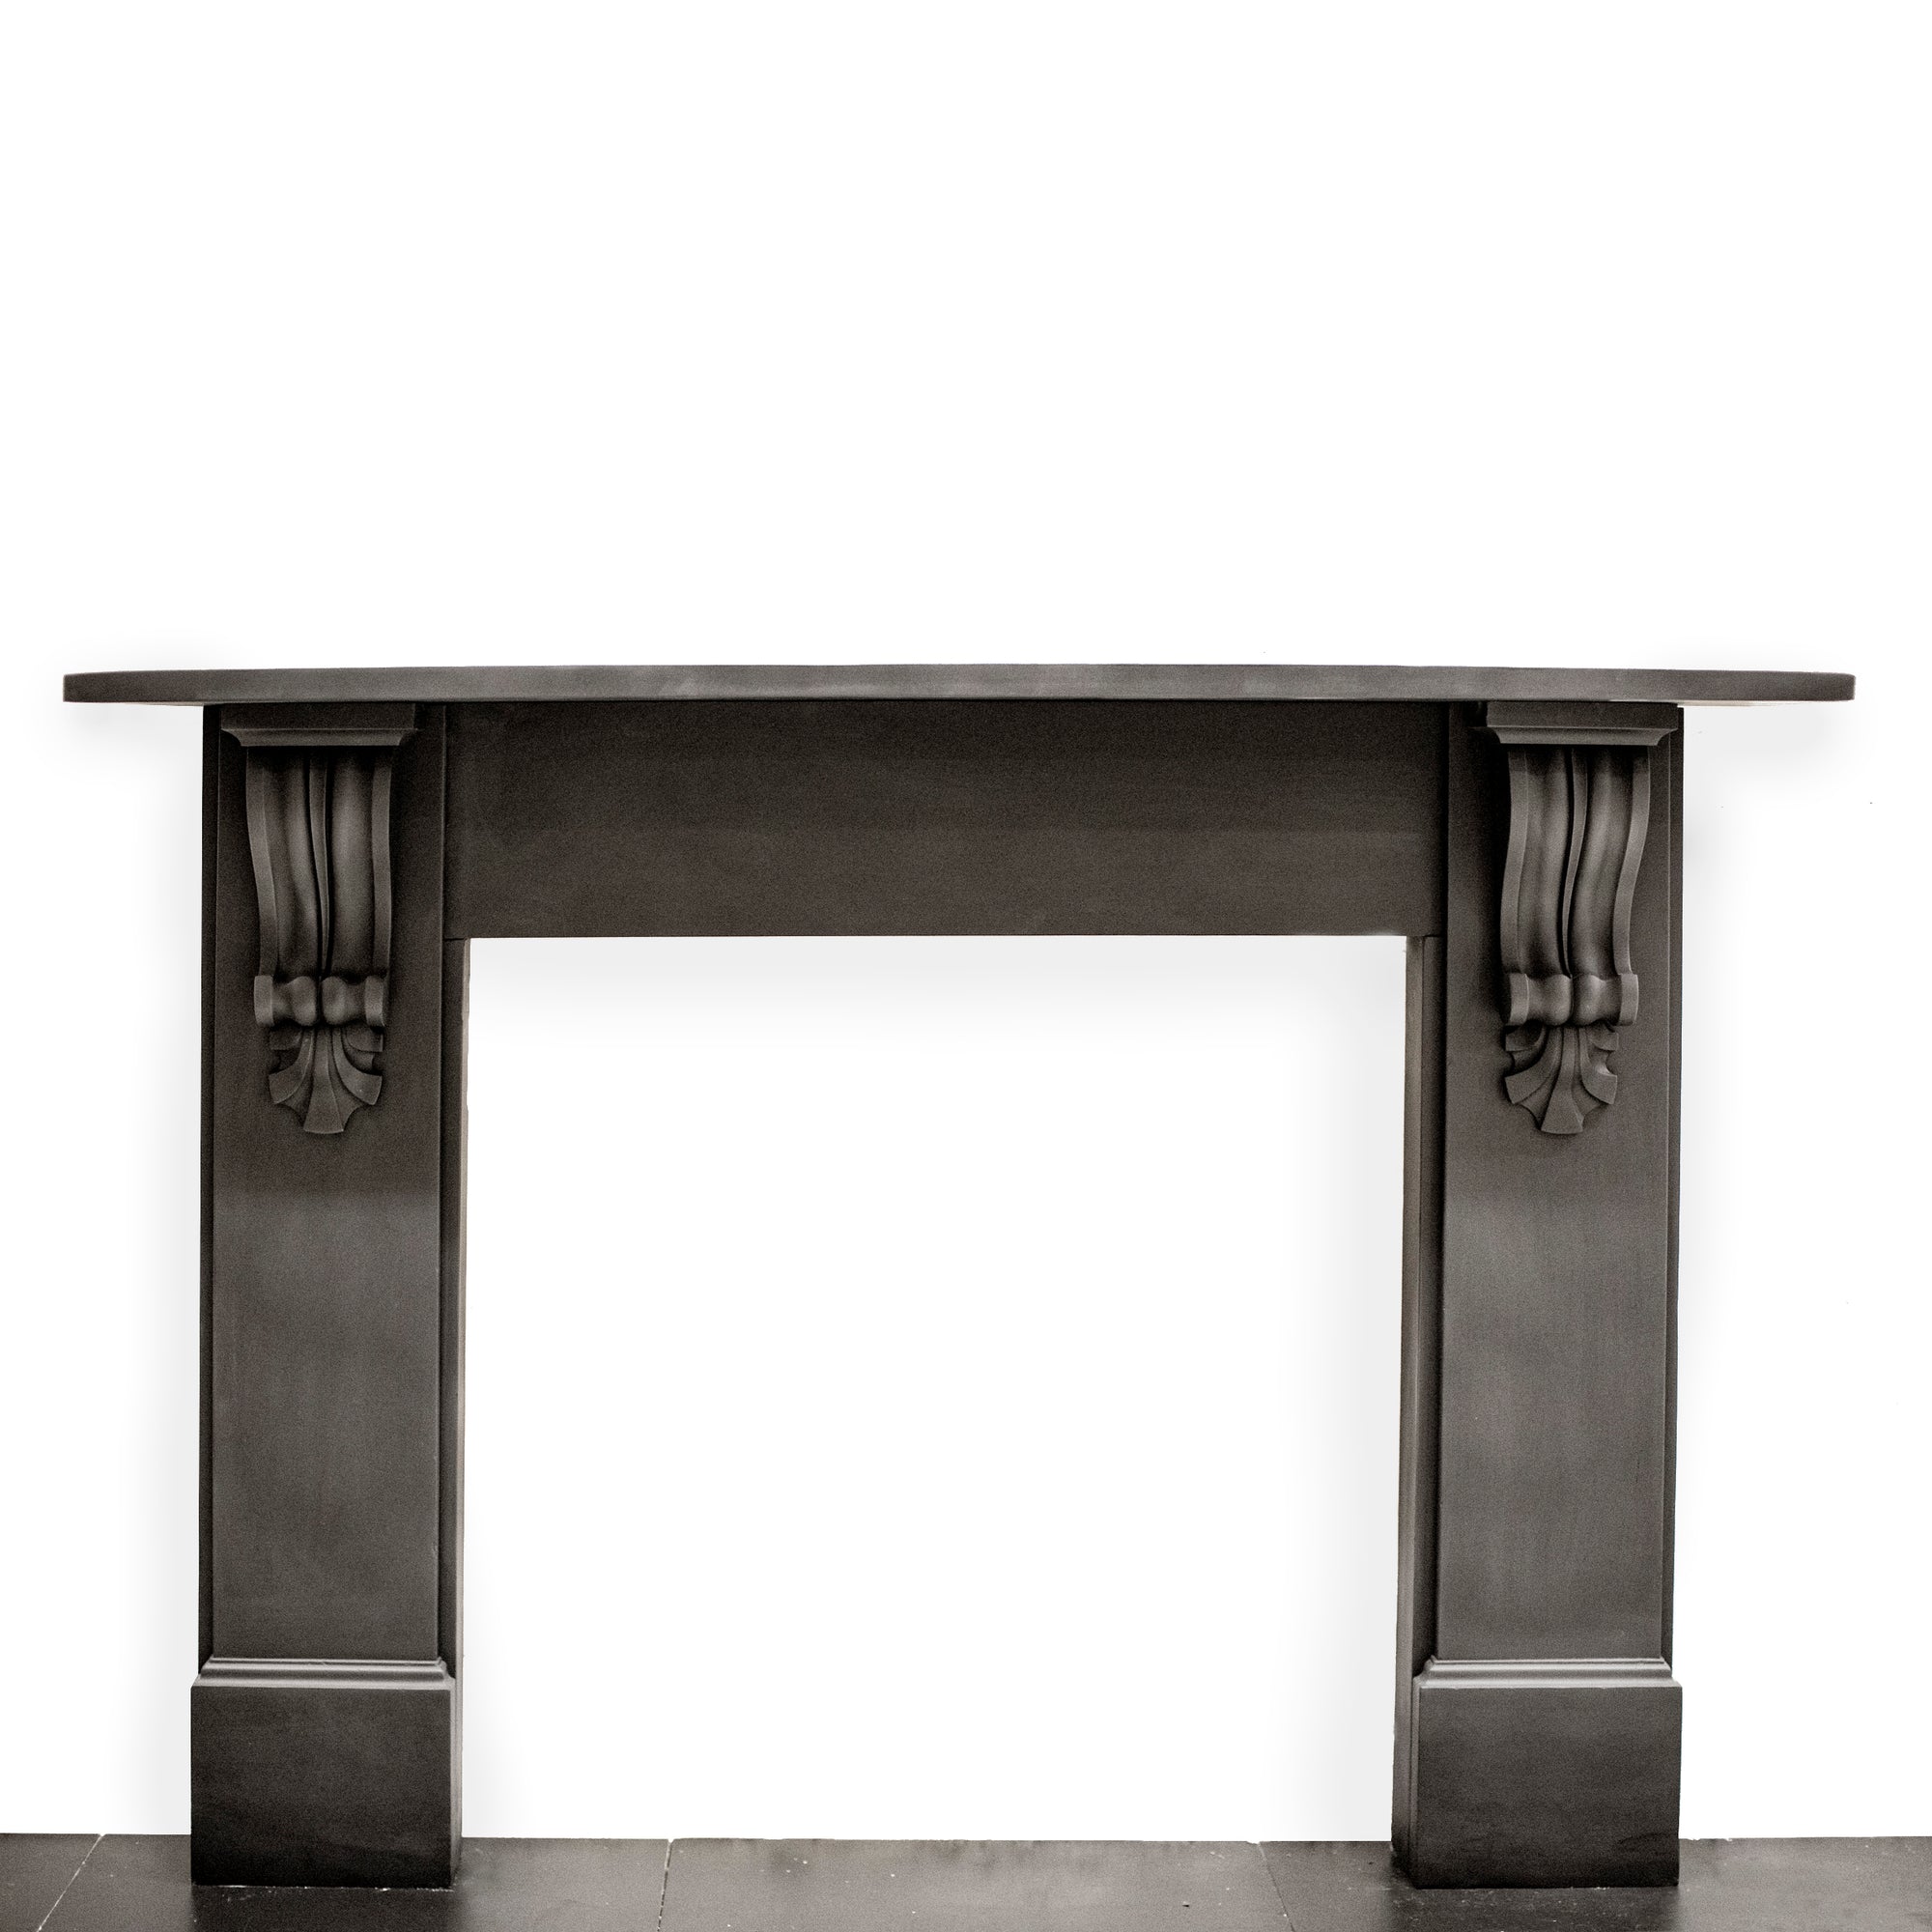 Large Antique Slate Fireplace Surround With Corbels | The Architectural Forum